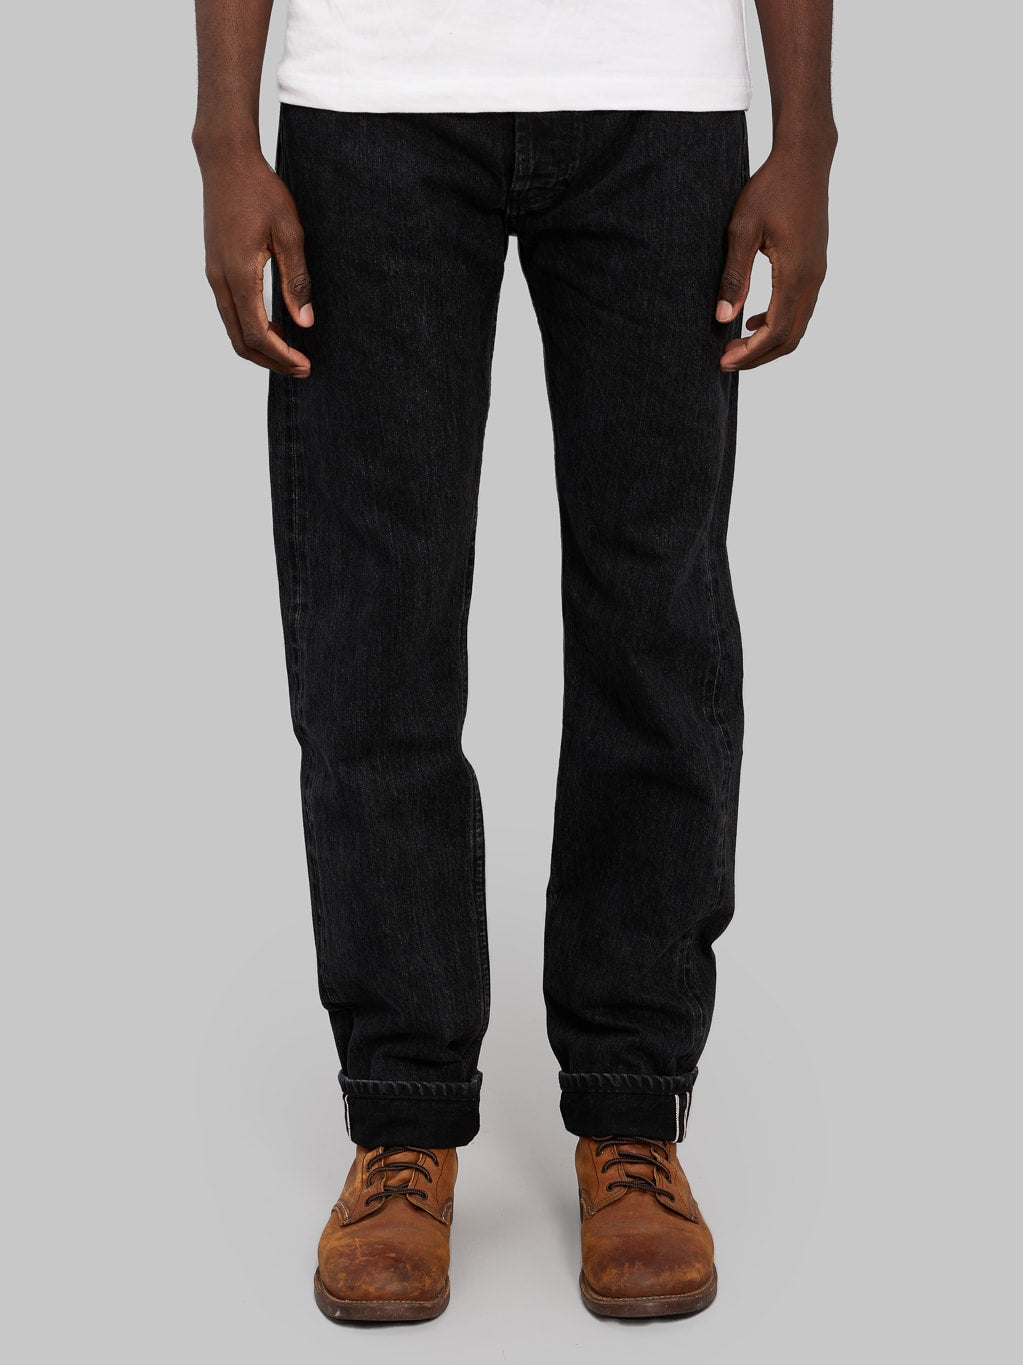 3sixteen CT 220x Classic Tapered Stonewashed Double Black front fit